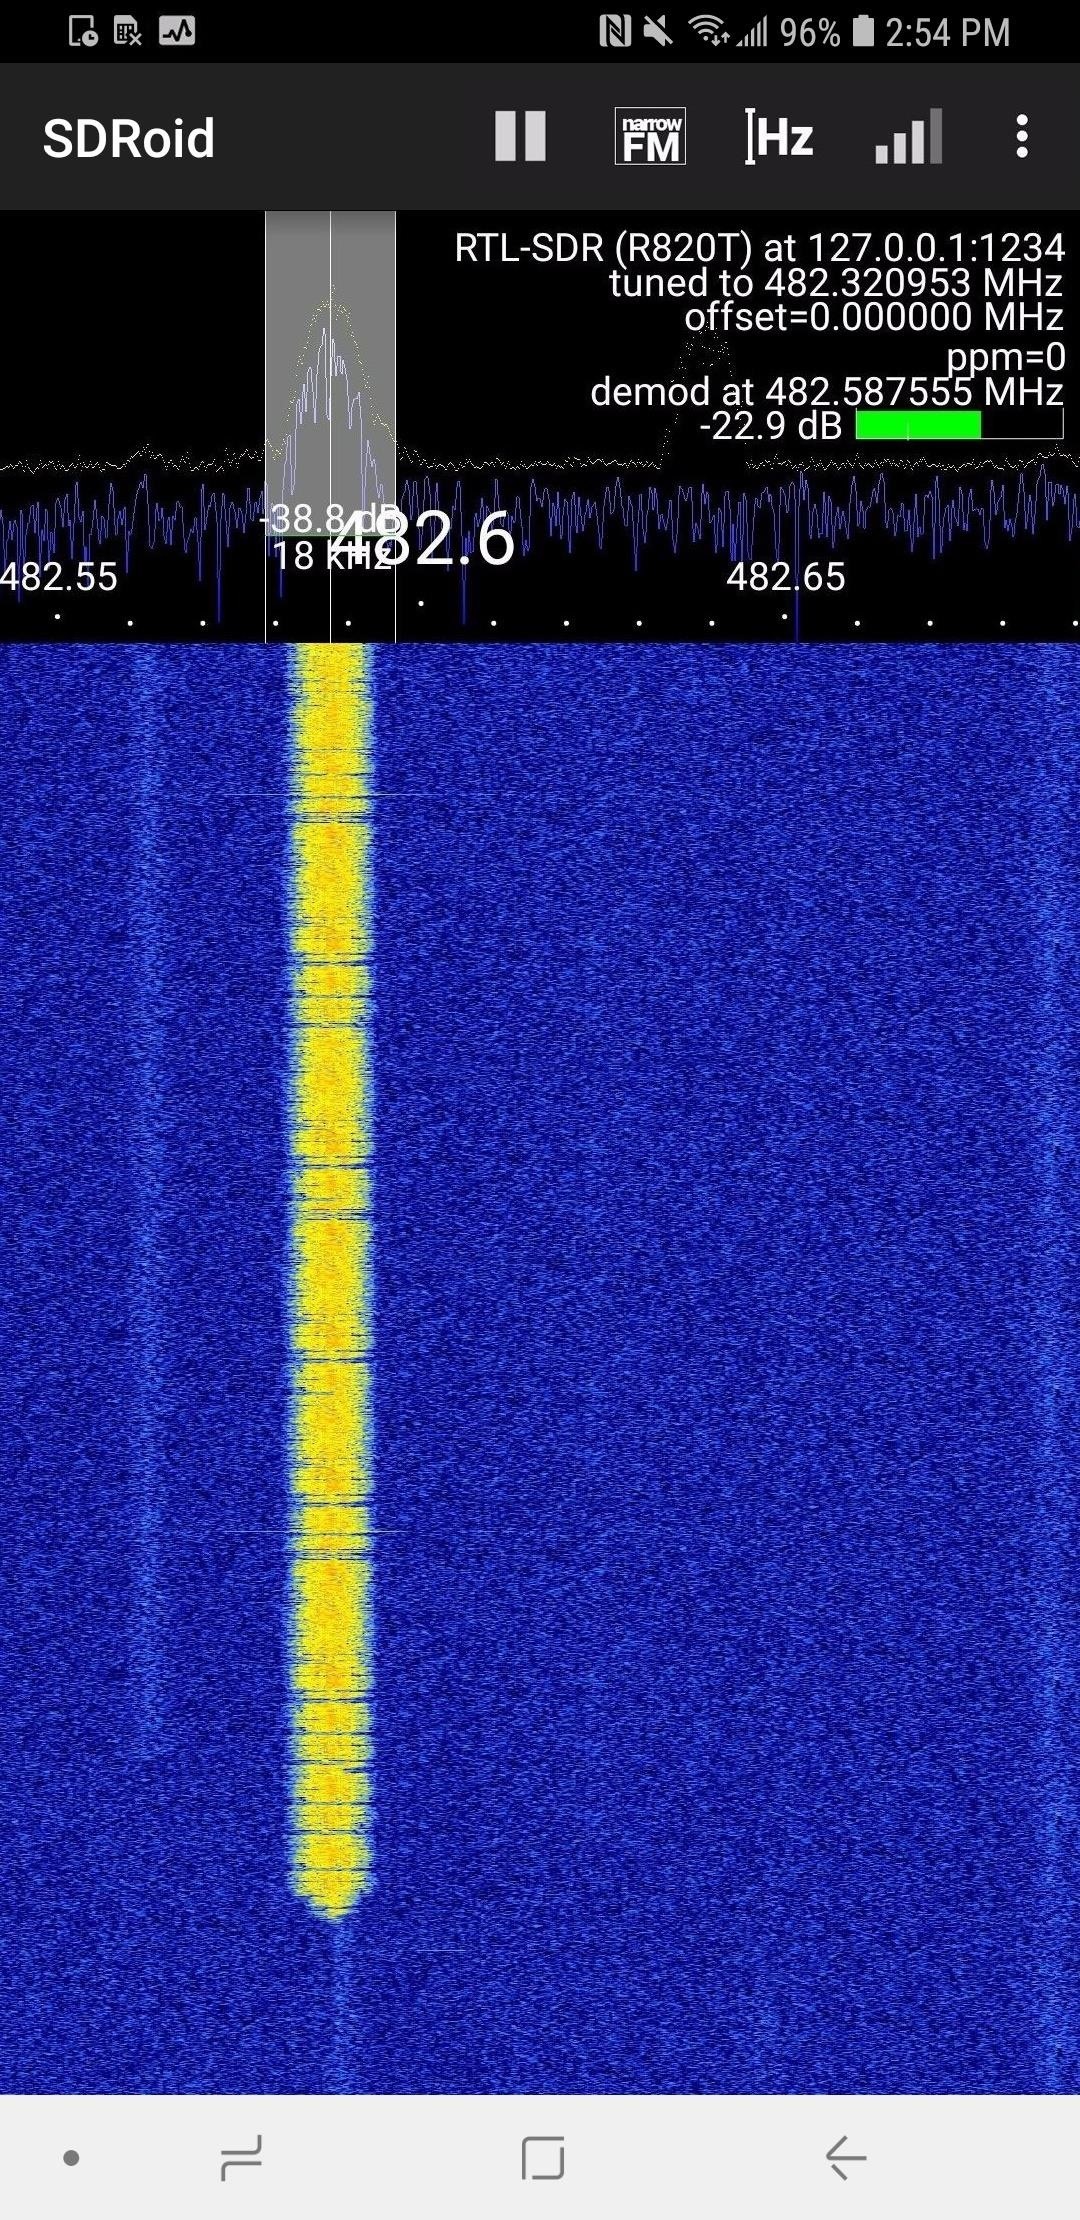 How to Listen to Radio Conversations on Android with an RTL-SDR Dongle & OTG Adapter